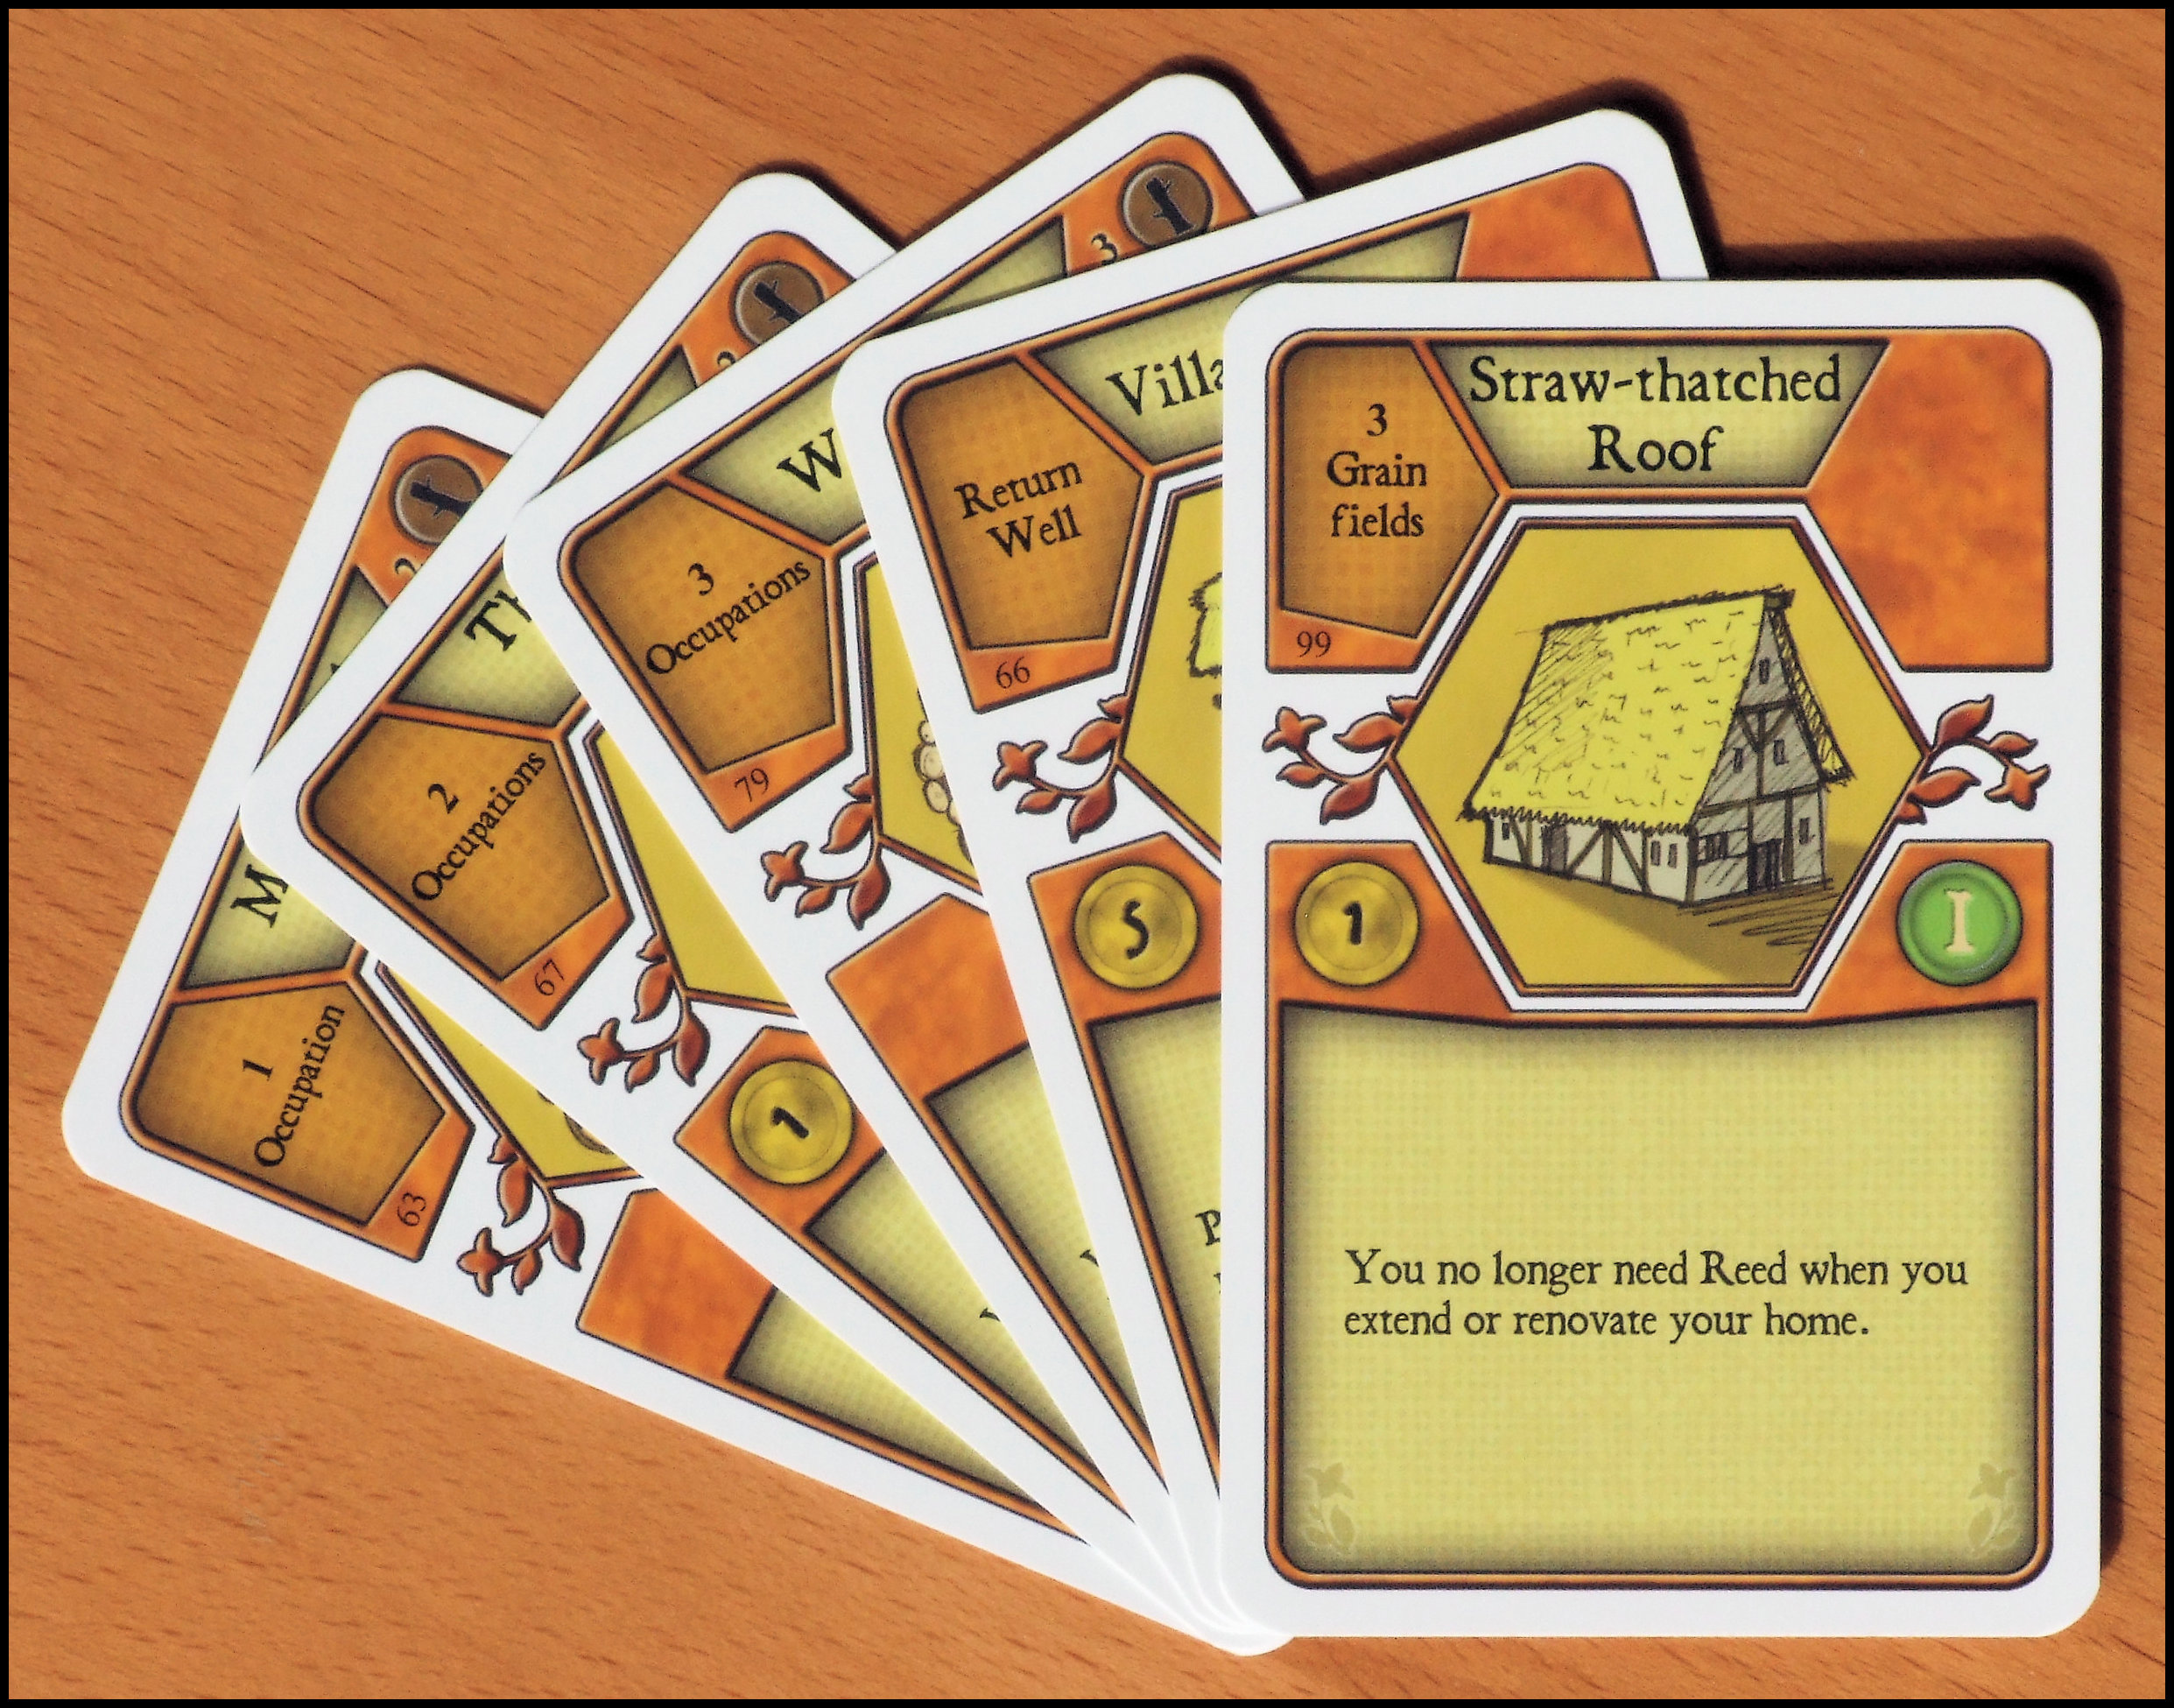 Agricola - Sample Minor Improvements Cards With Requirements (Z-Man Games Edition)